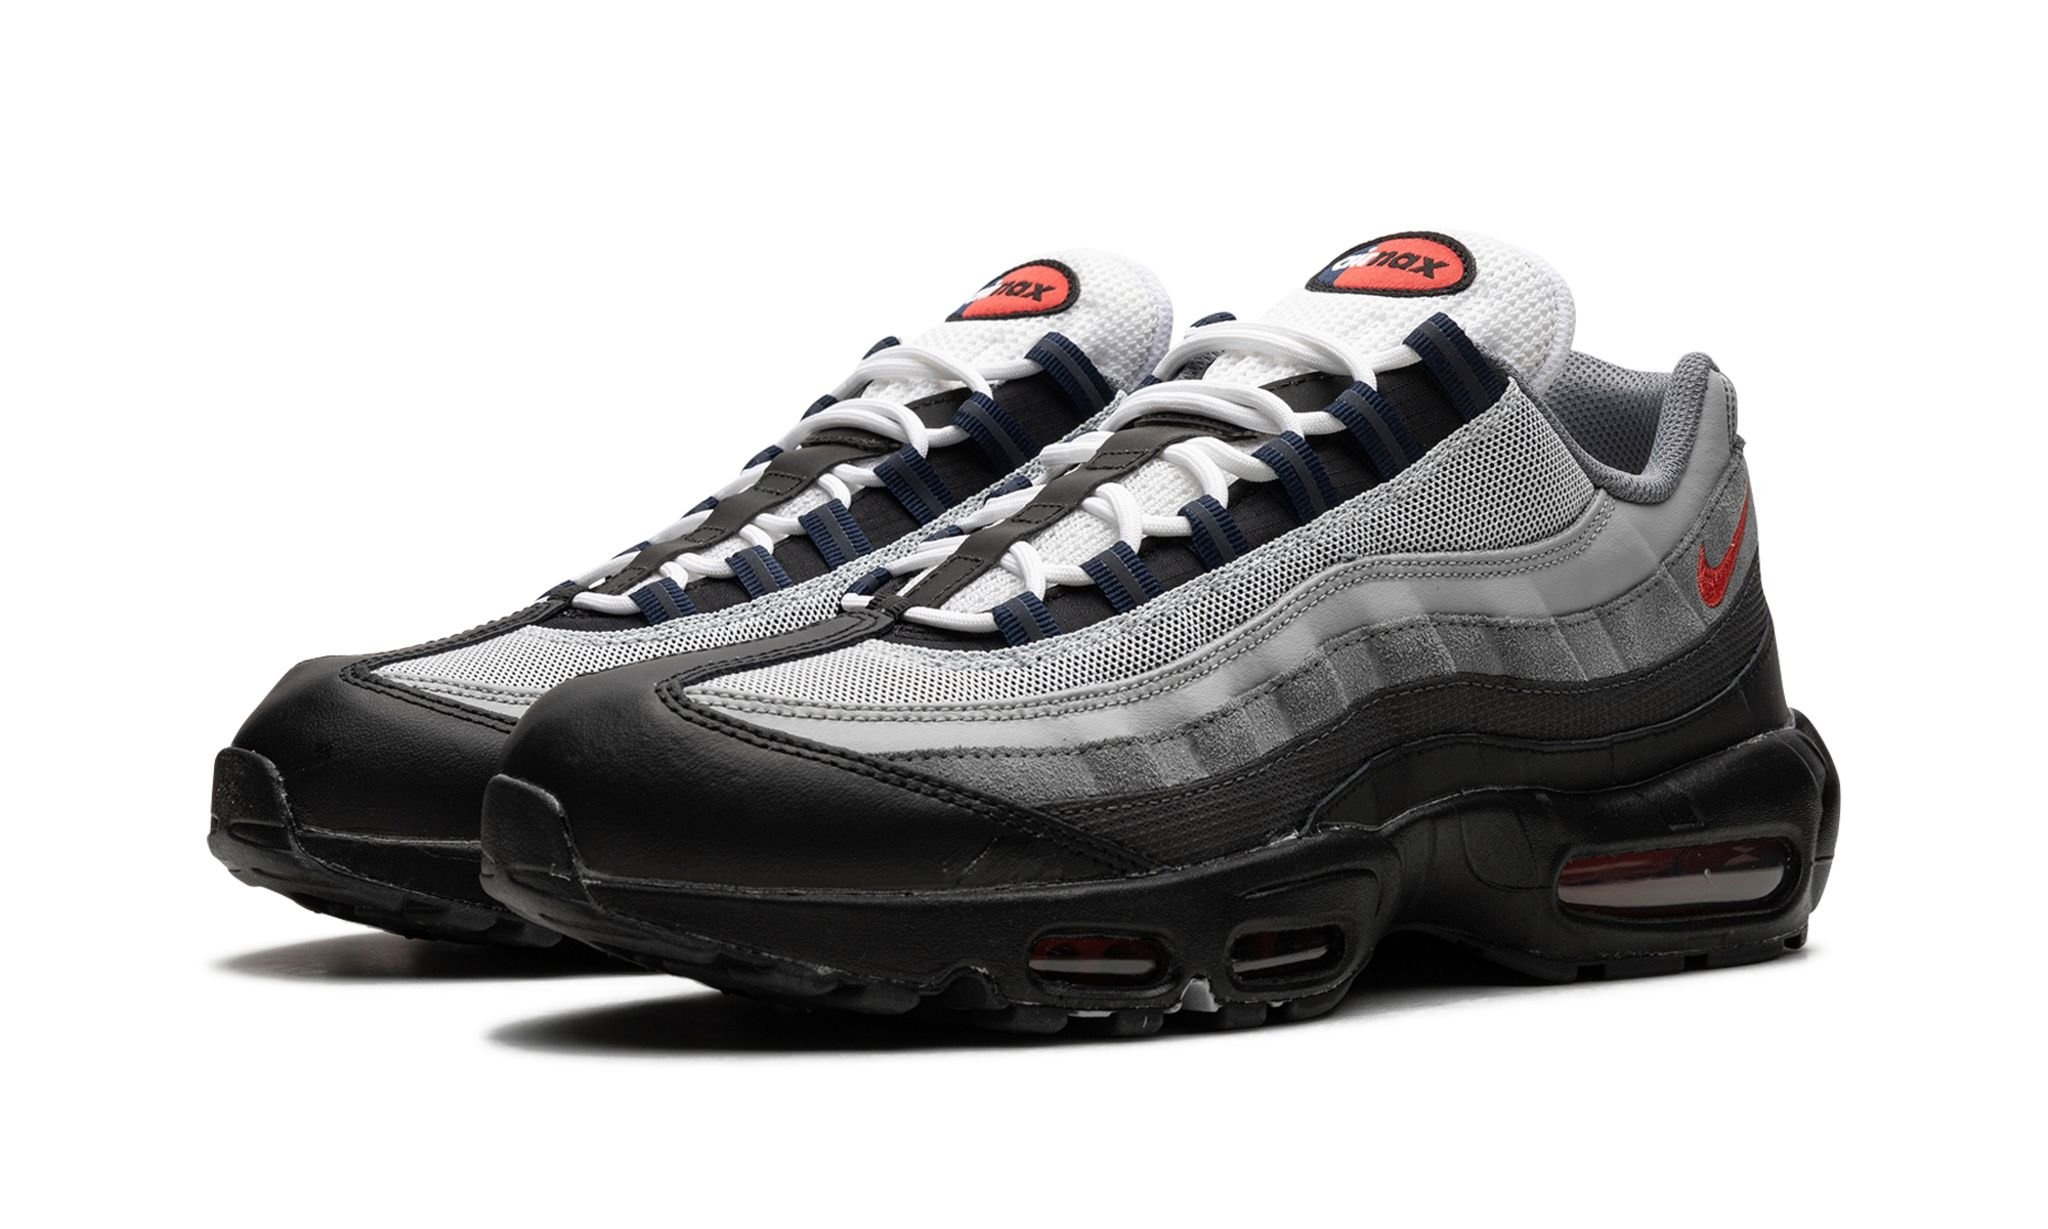 Air Max 95 "Track Red" - 2